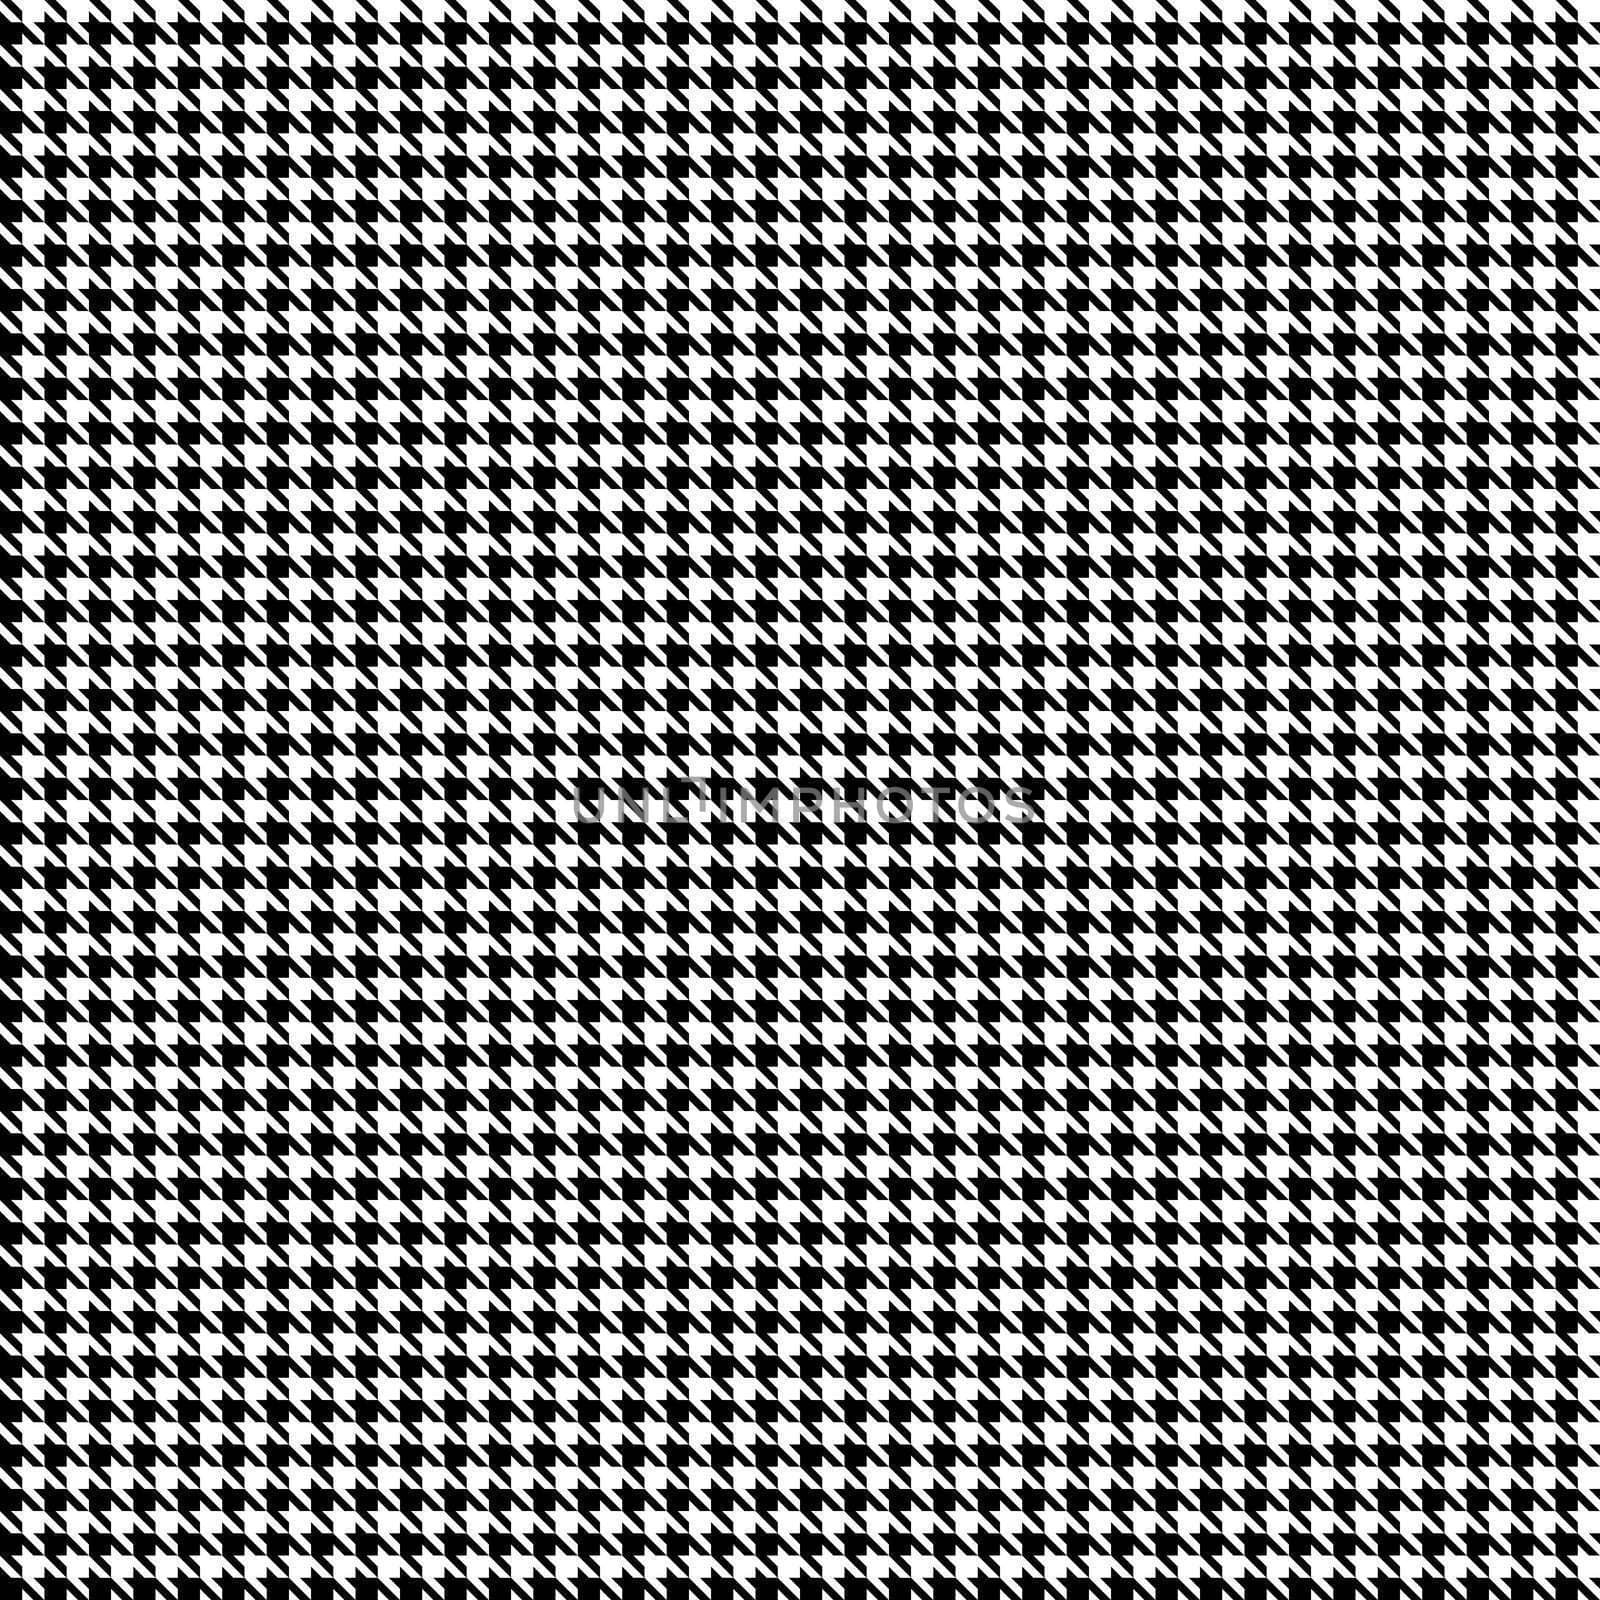 Black and white seamless houndstooth pattern or texture.